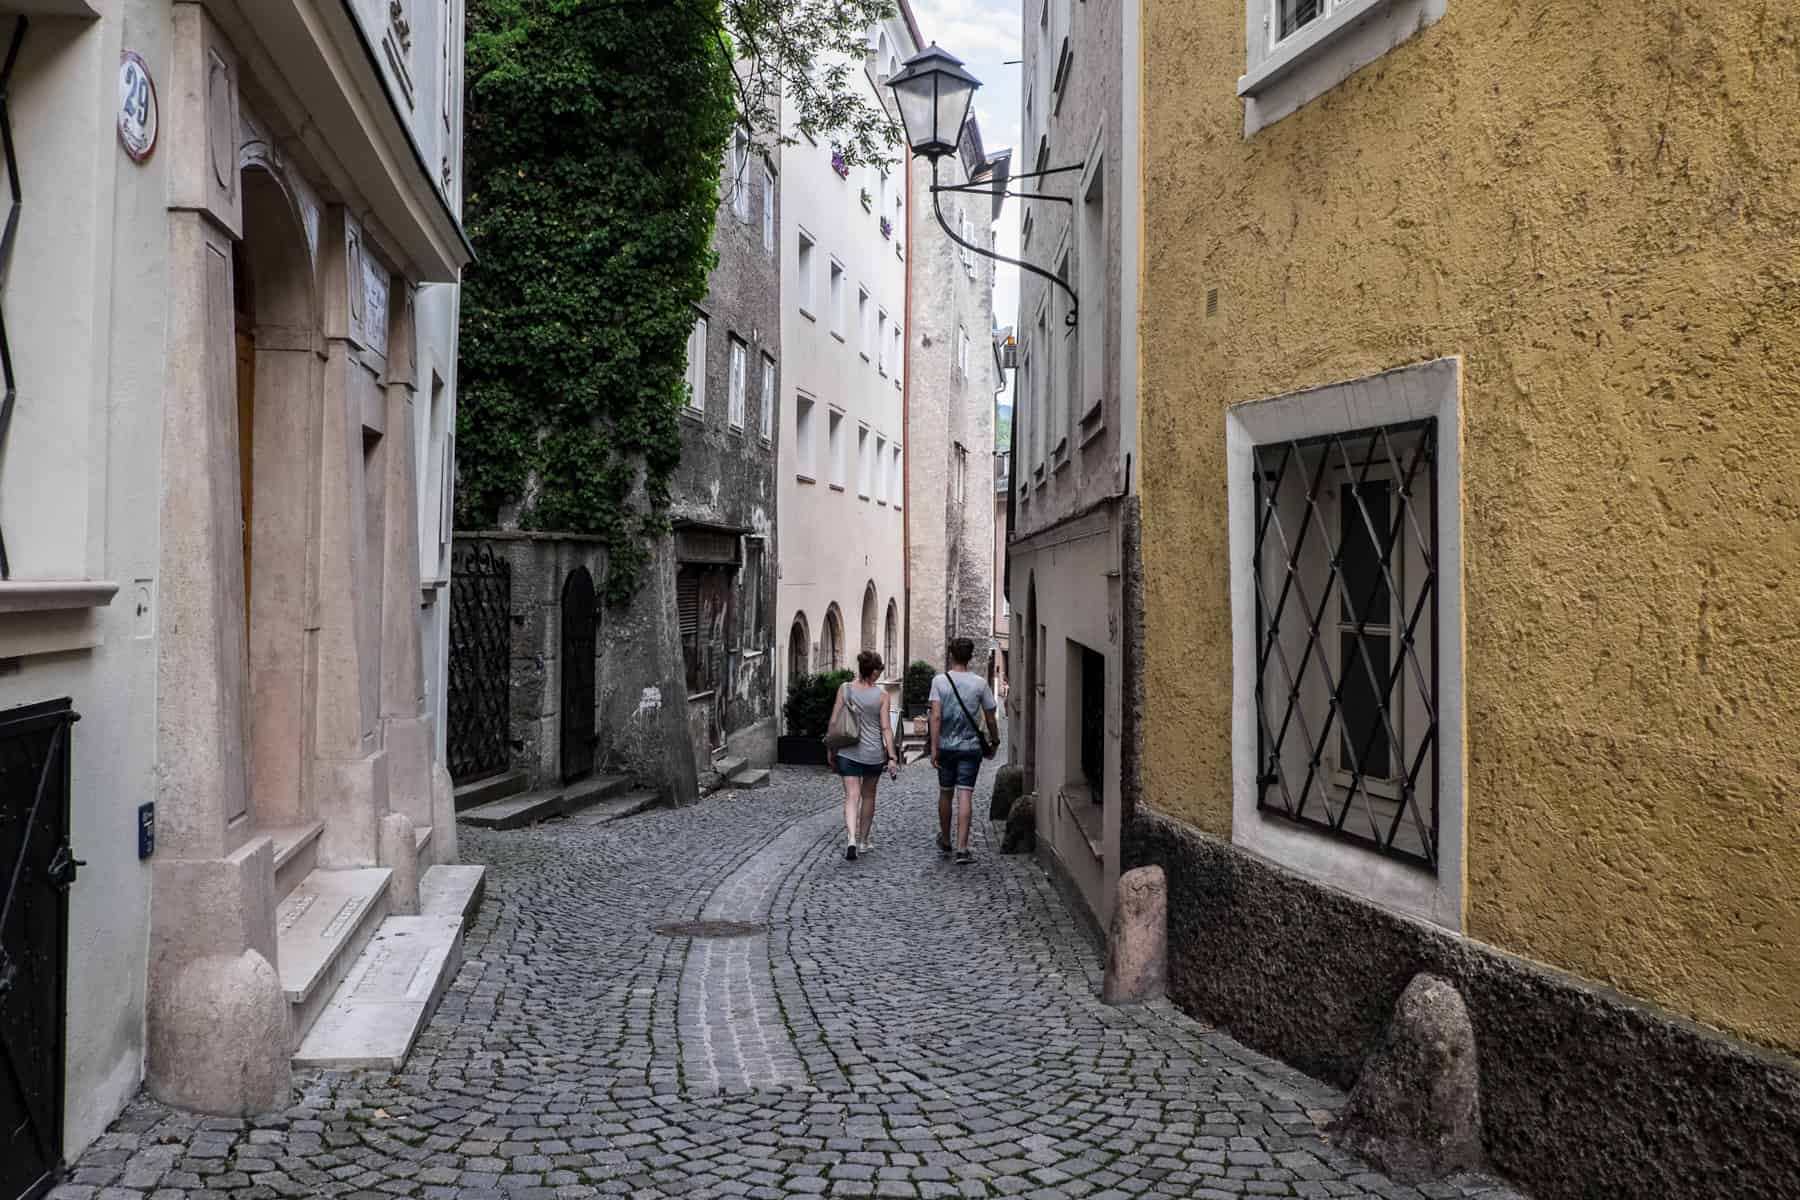 Two people walk down the oldest street a Salzburg – a wide cobblestoned street lined either side with light pink and yellow building with metal window bars and street lamps.